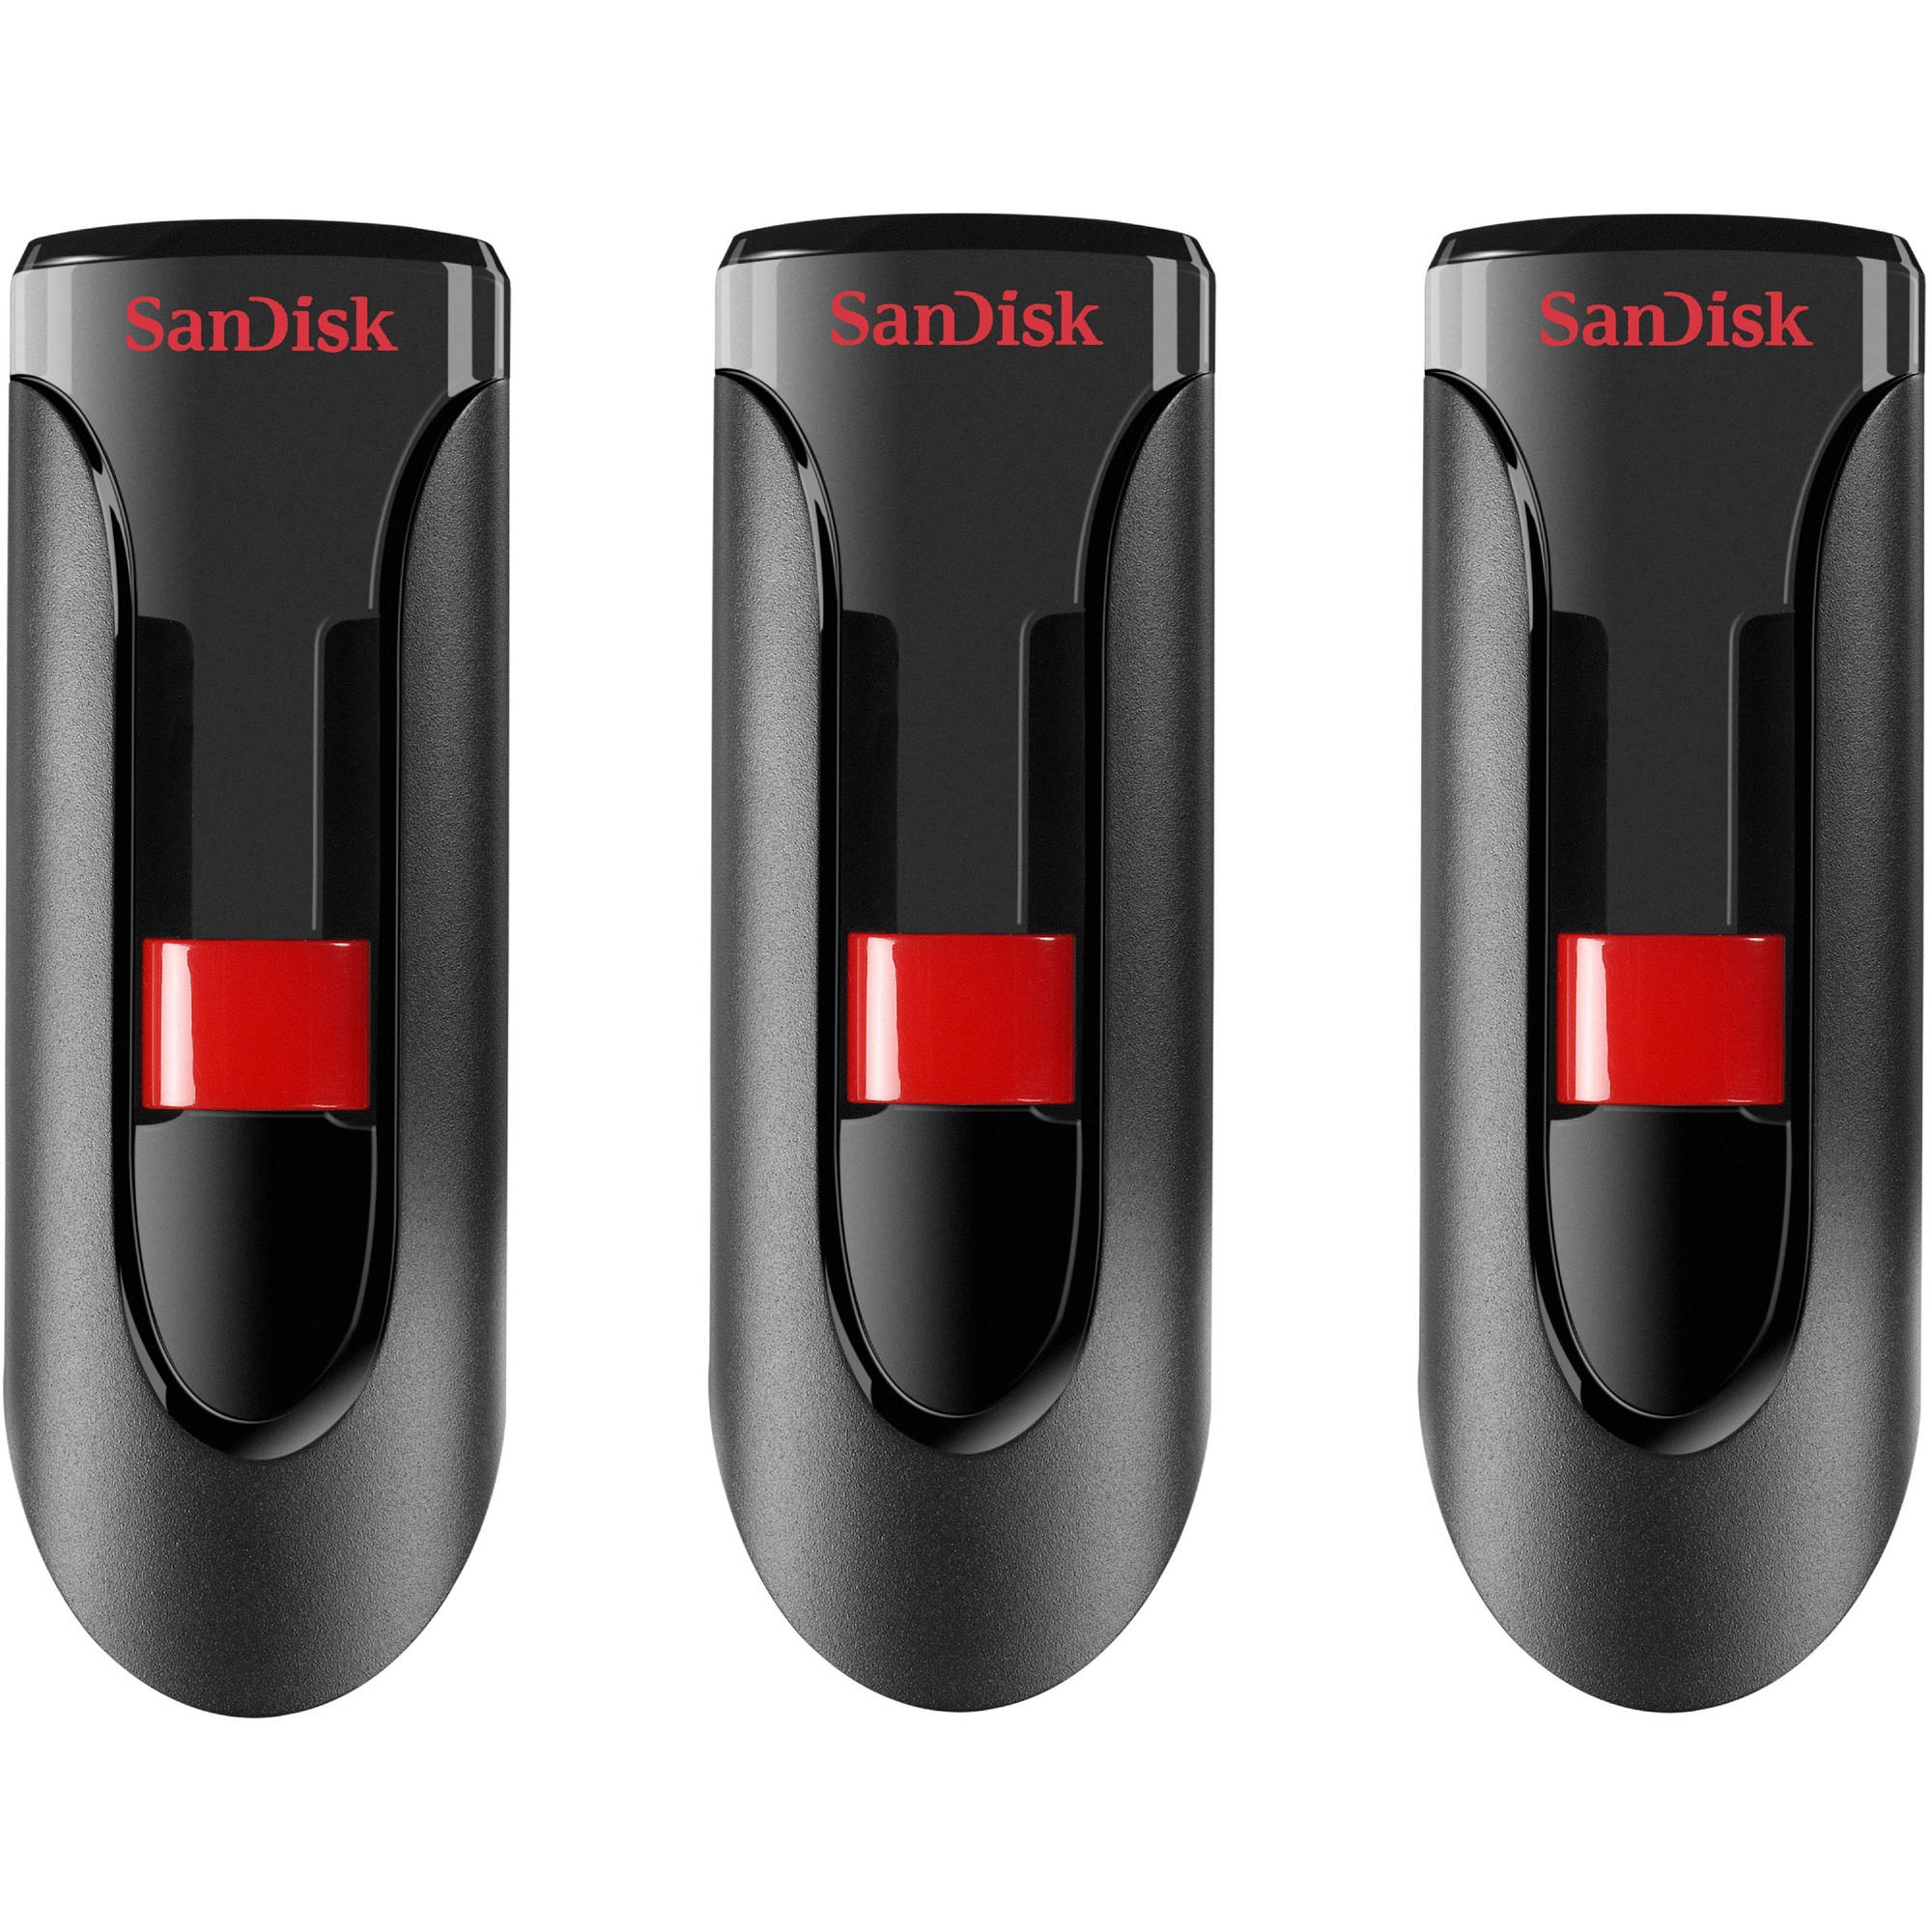 SanDisk 16GB Cruzer Glide USB 2.0 Flash Drive, 3 Pack - SDCZ60-016G-AW46T - image 1 of 7